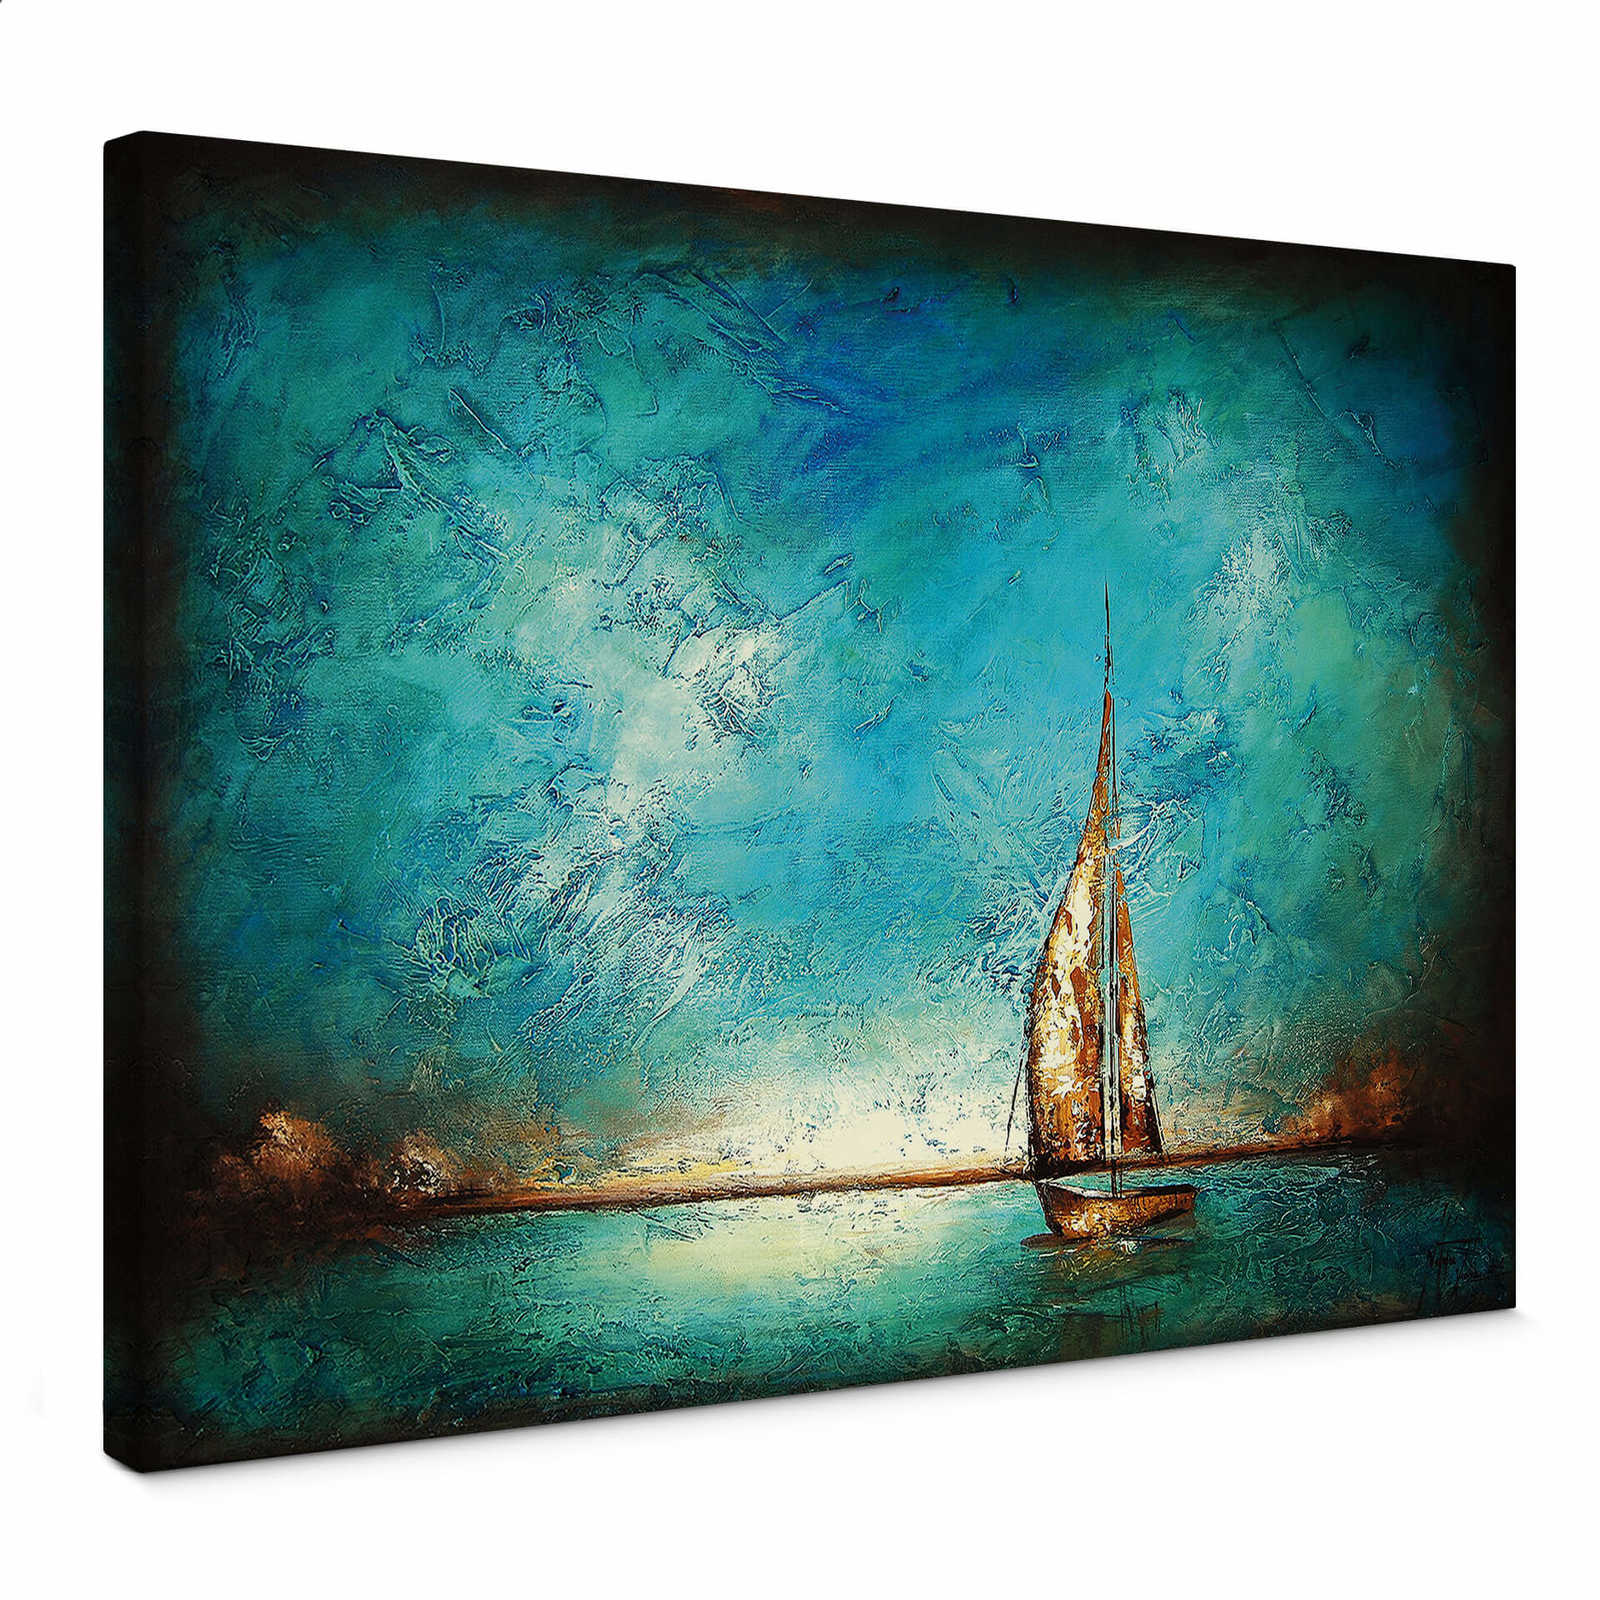         Abstract art canvas print "Loneliness" by Fedrau
    